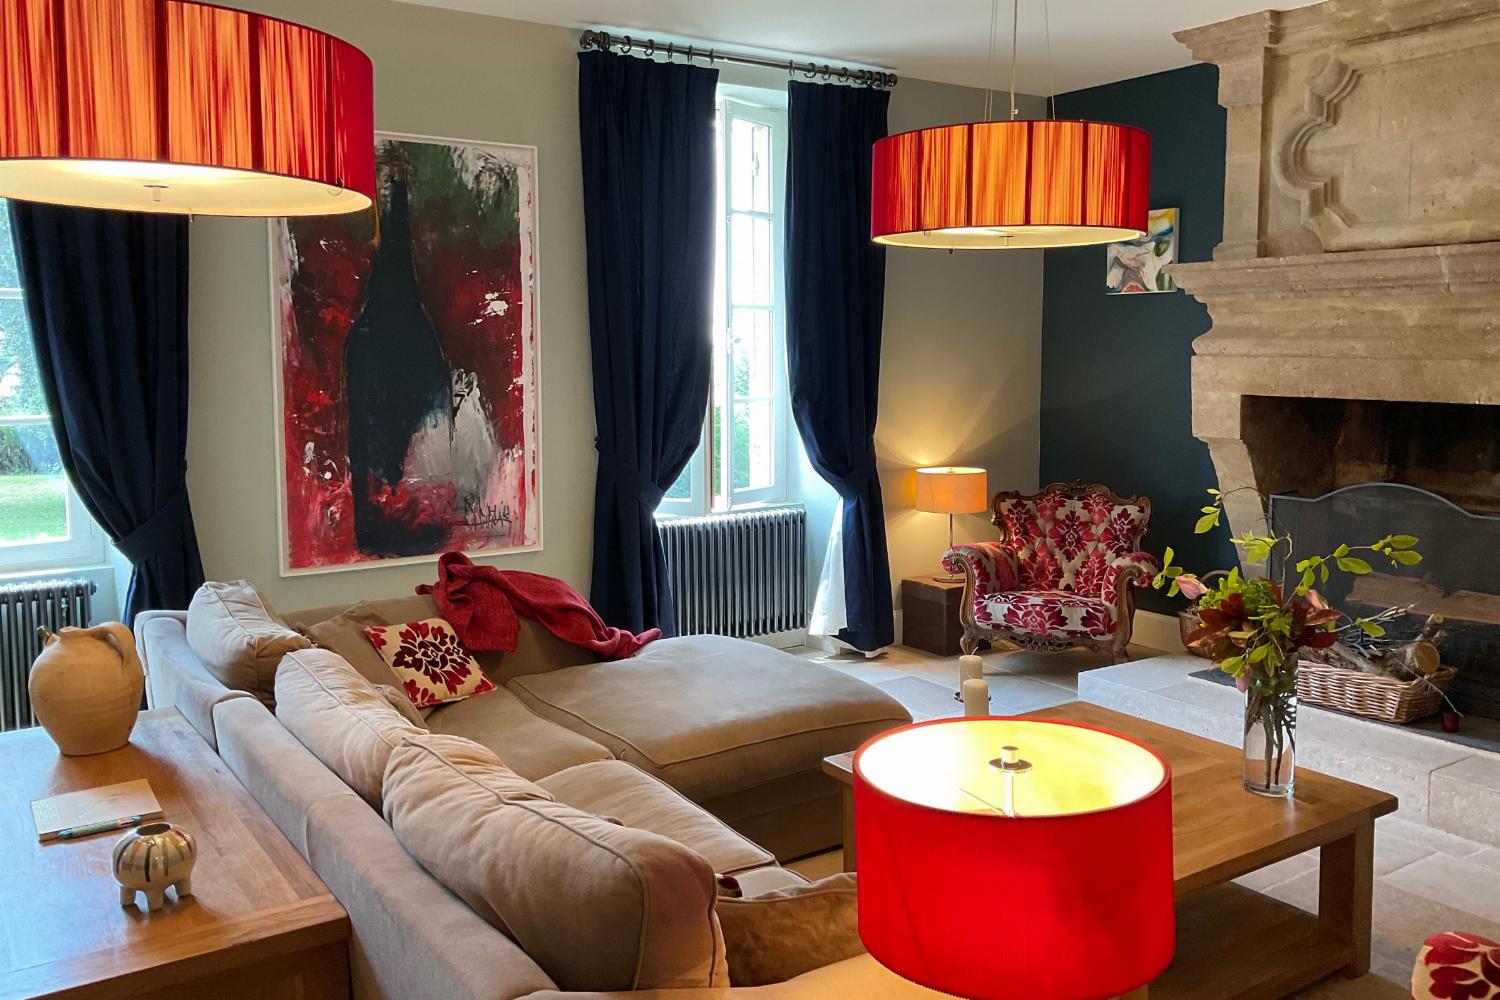 Living room | Rental accommodation in Nouvelle-Aquitaine